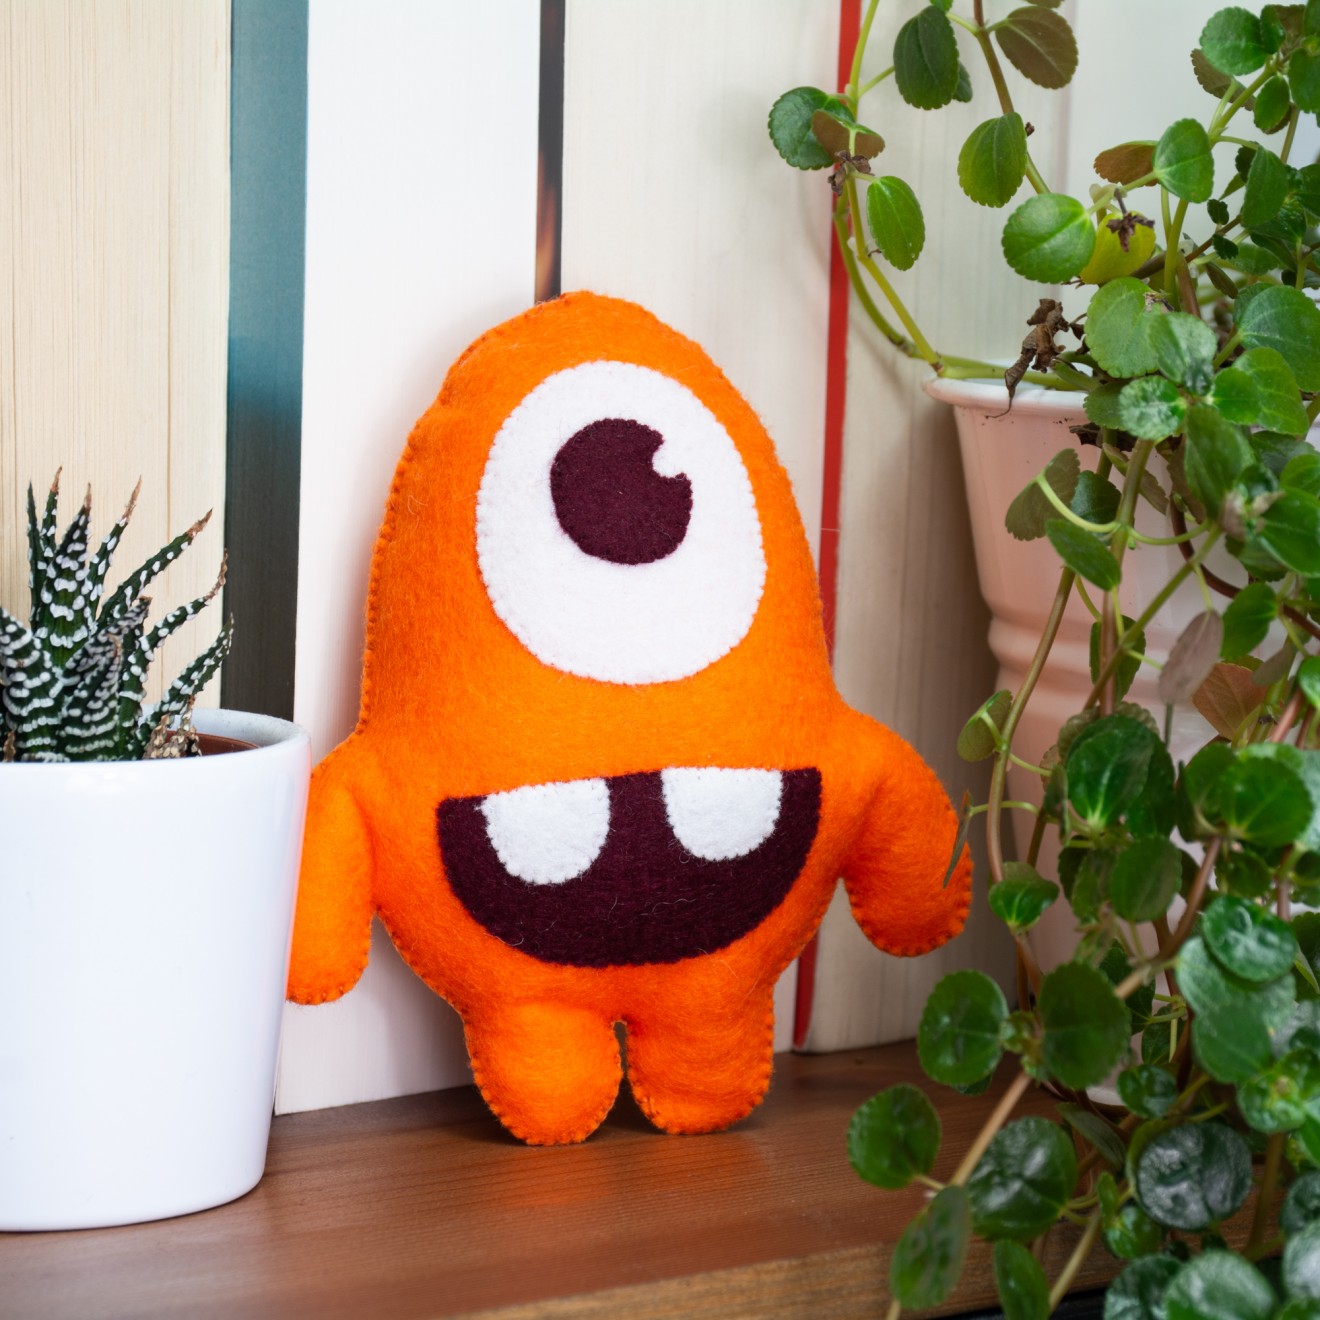 Image of the product Orange Eddy, from the product category Cuddly toys